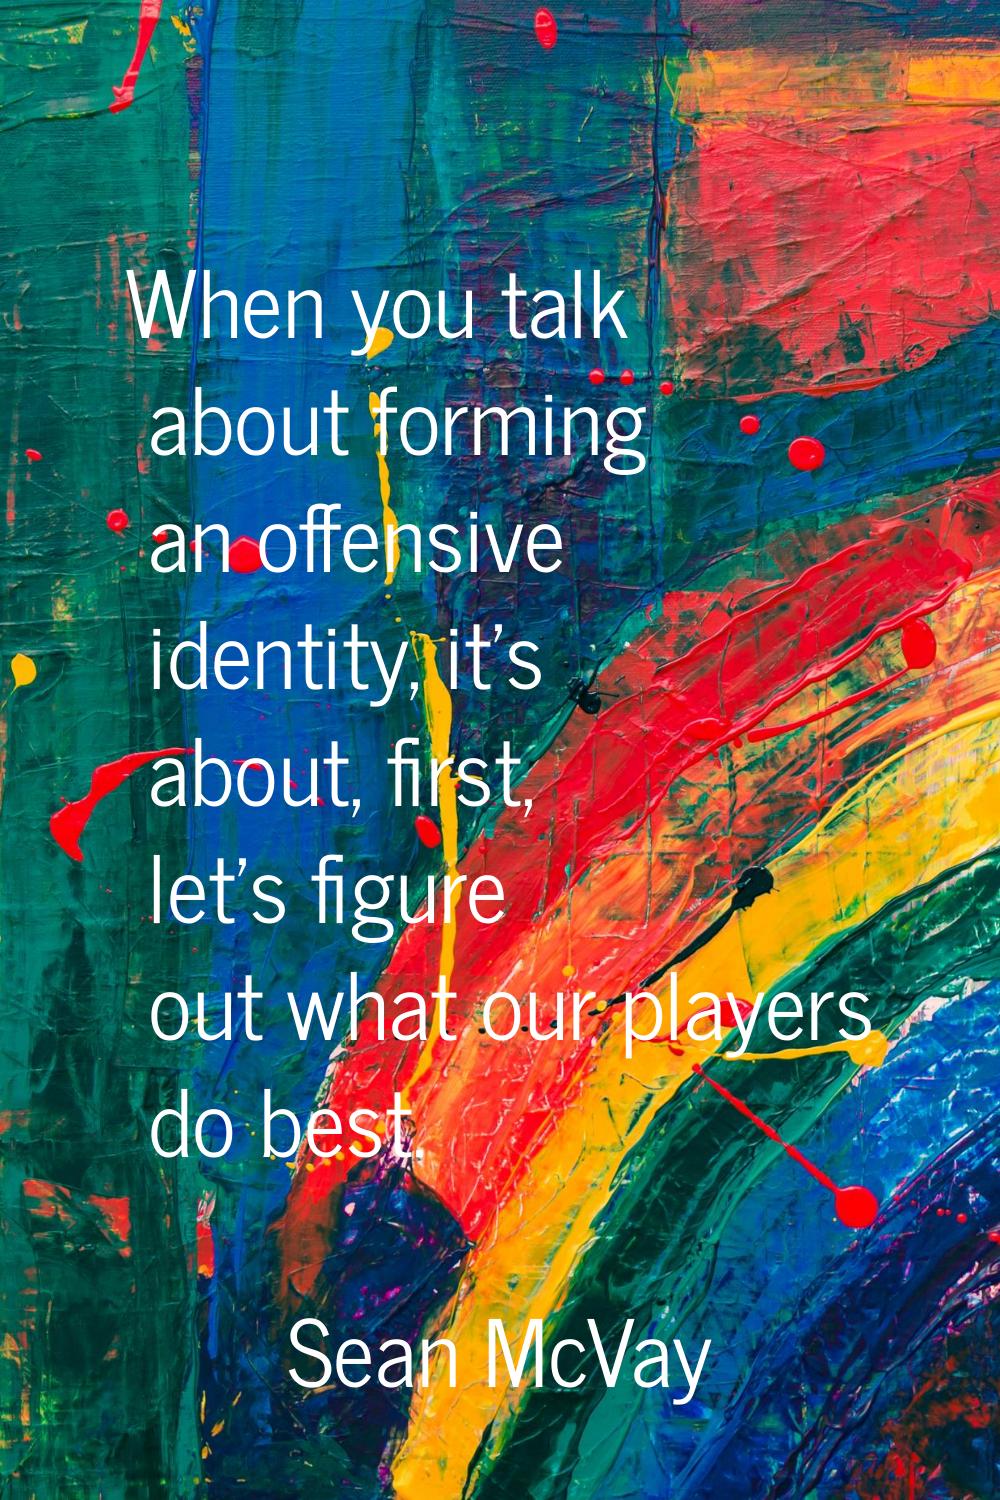 When you talk about forming an offensive identity, it's about, first, let's figure out what our pla